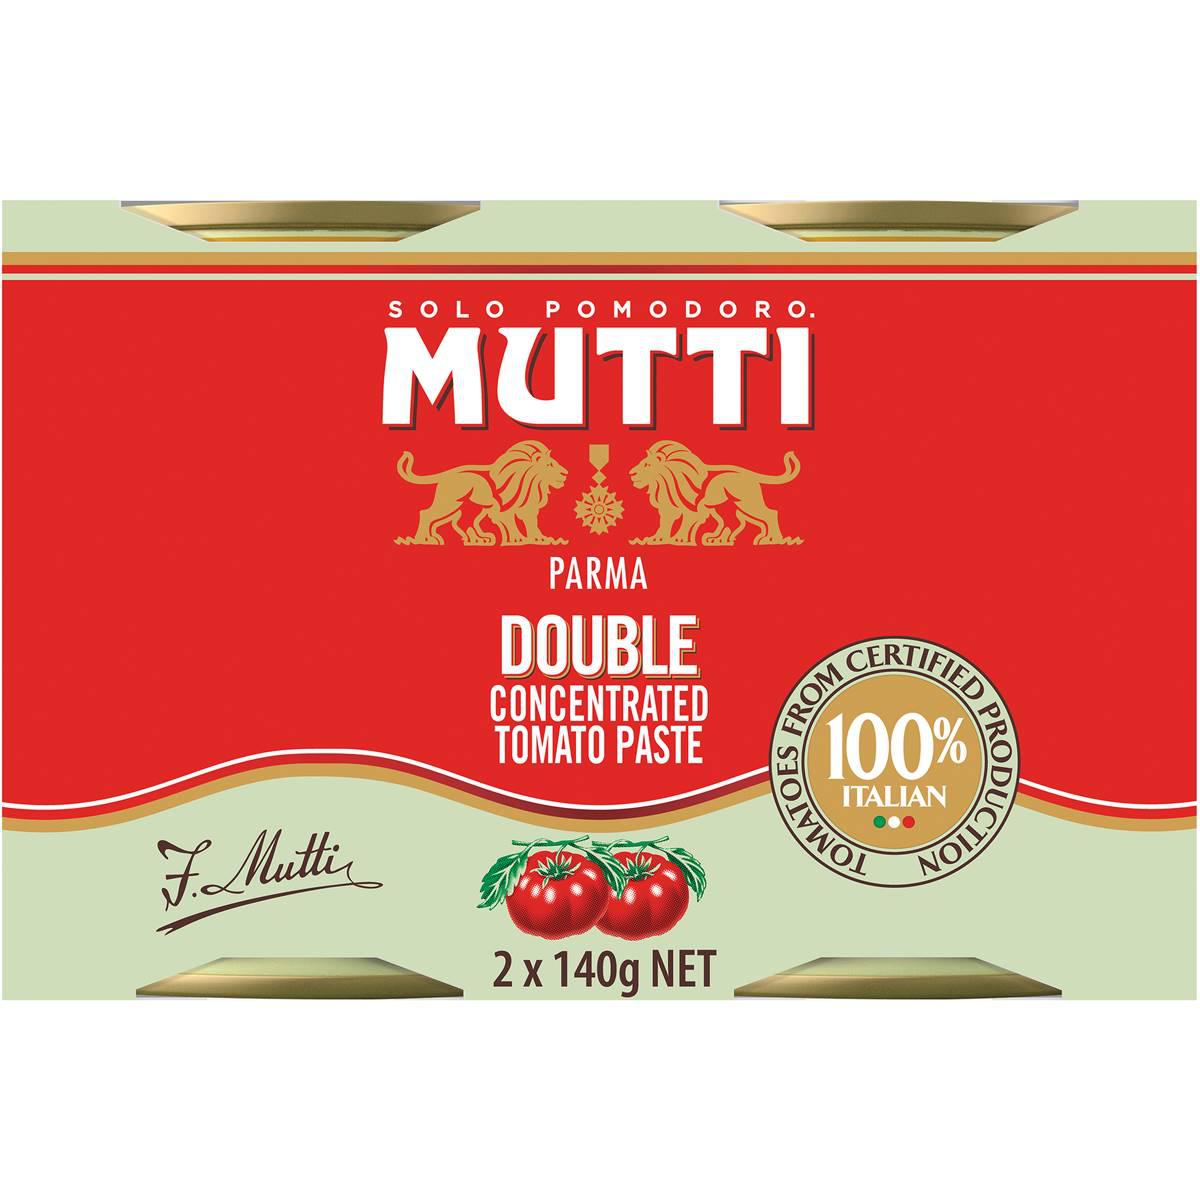 Mutti Parma Double Concentrated Tomato Paste 2x140g